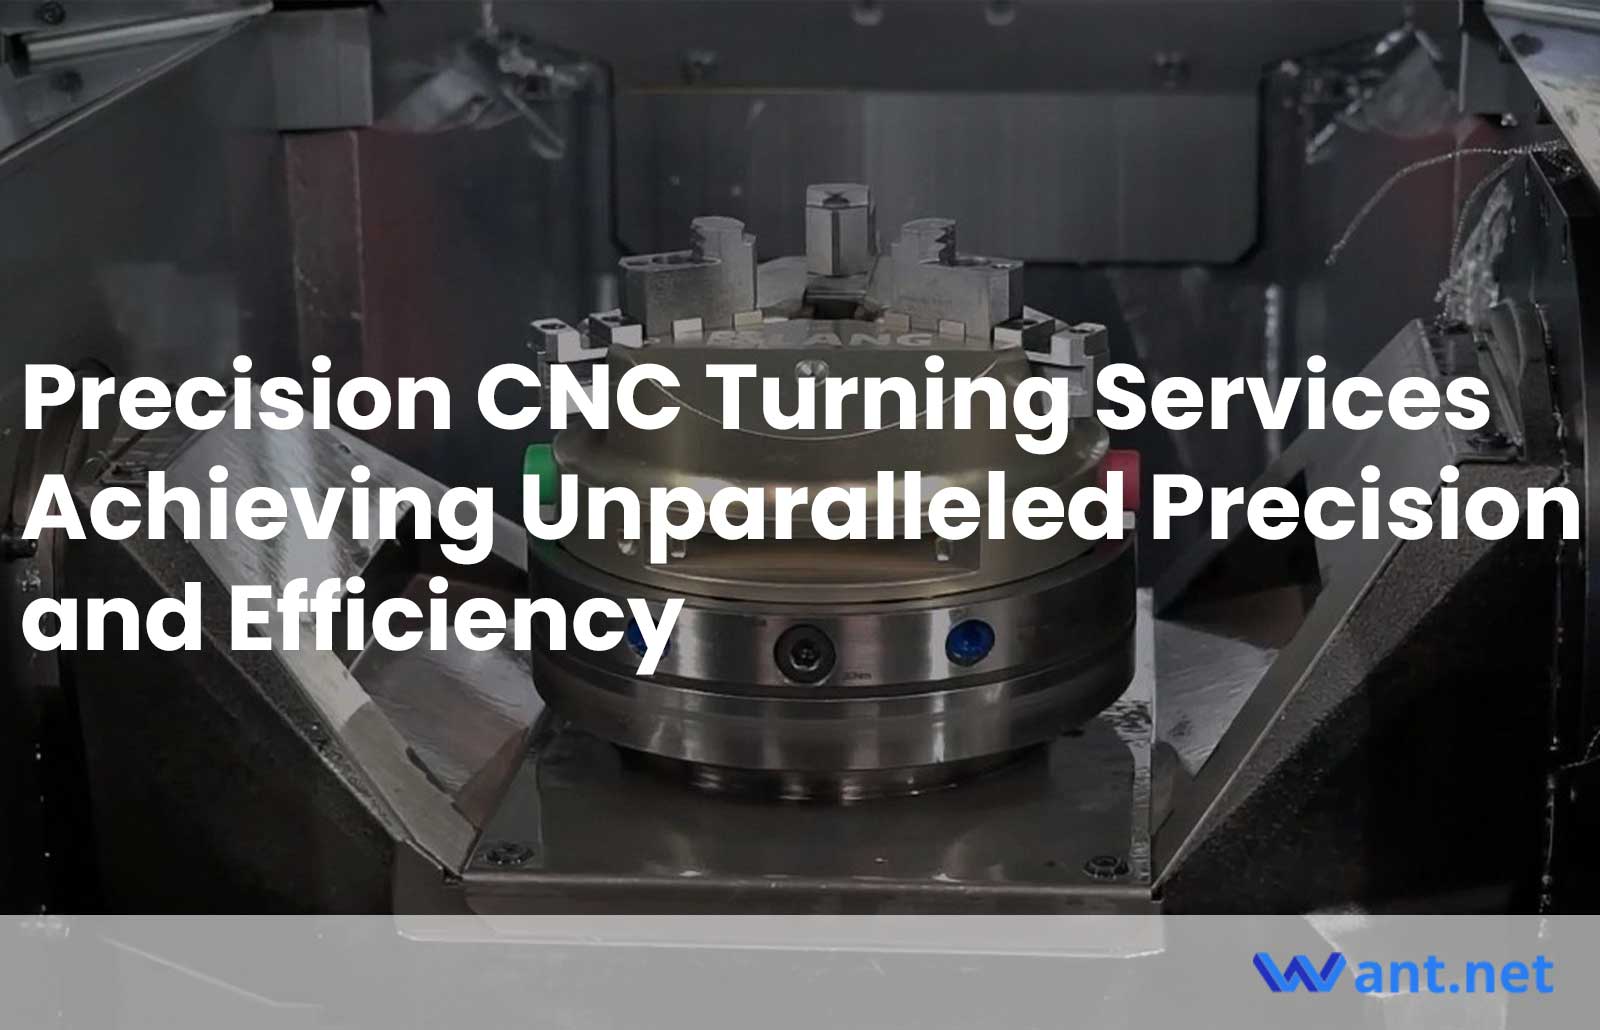 Precision CNC Turning Services: Achieving Unparalleled Precision and Efficiency